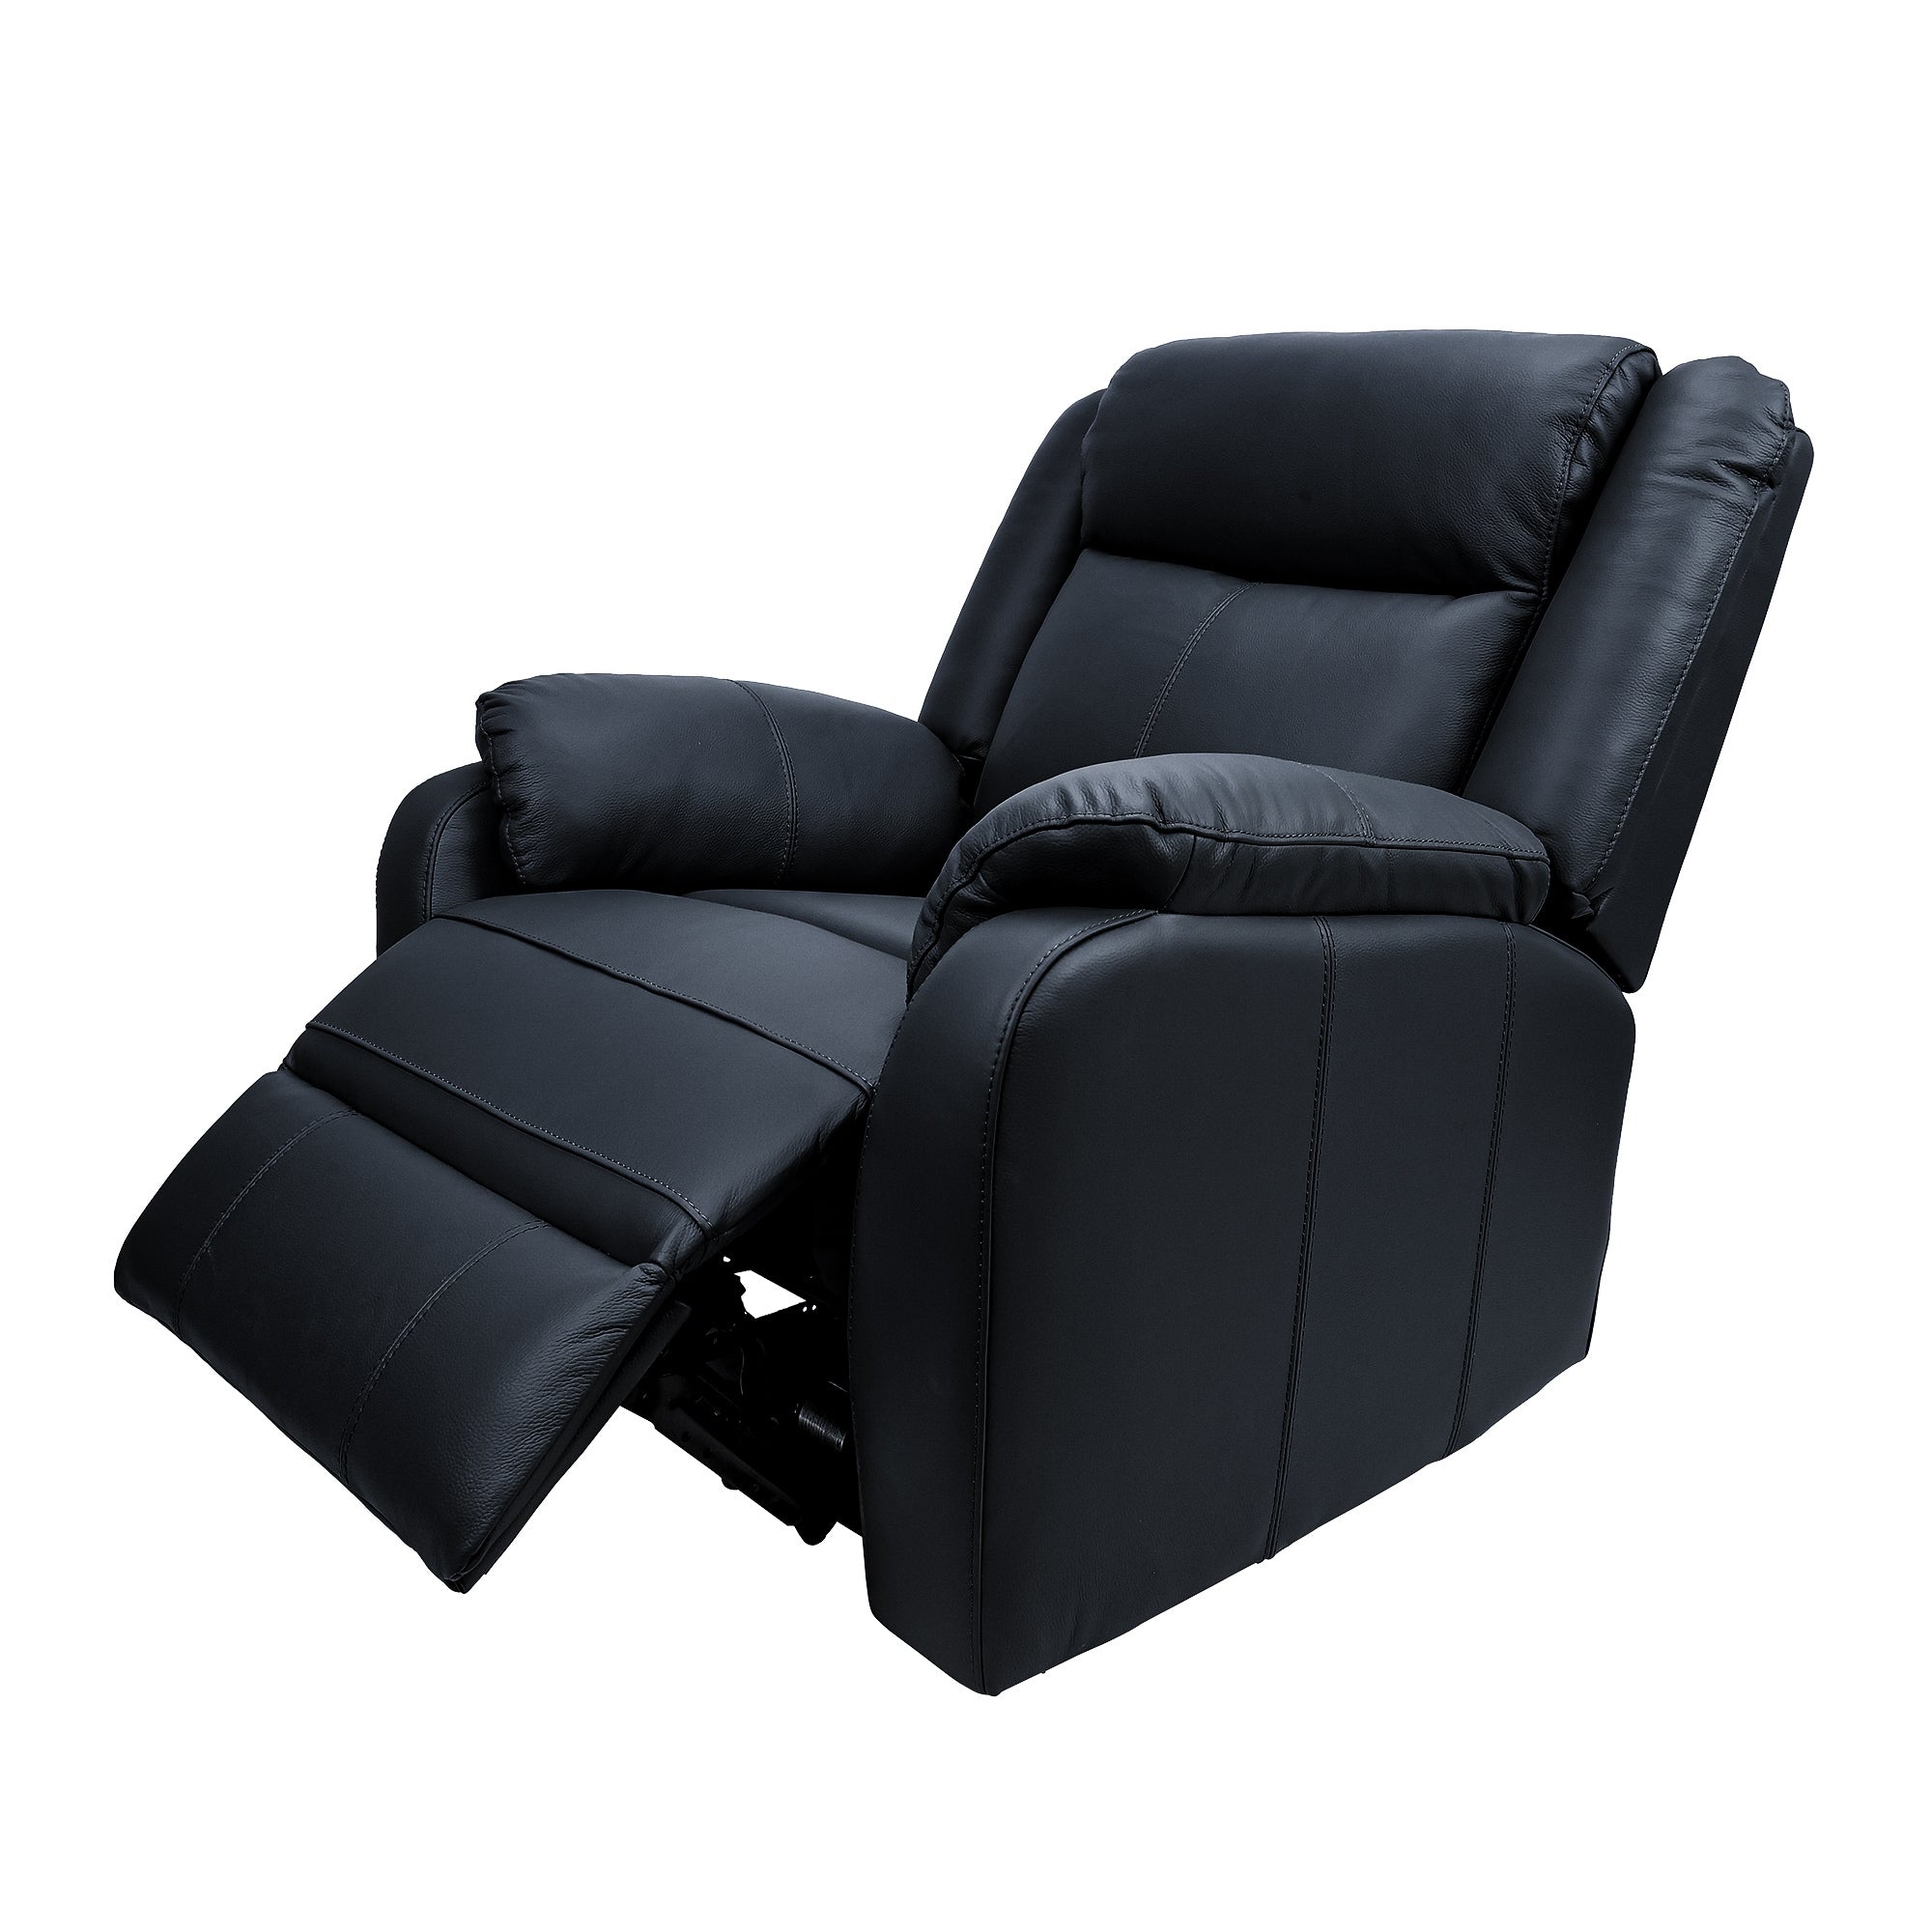 Black Electric Recliner, Genuine Leather, USB Port, 1 Seater Lounge